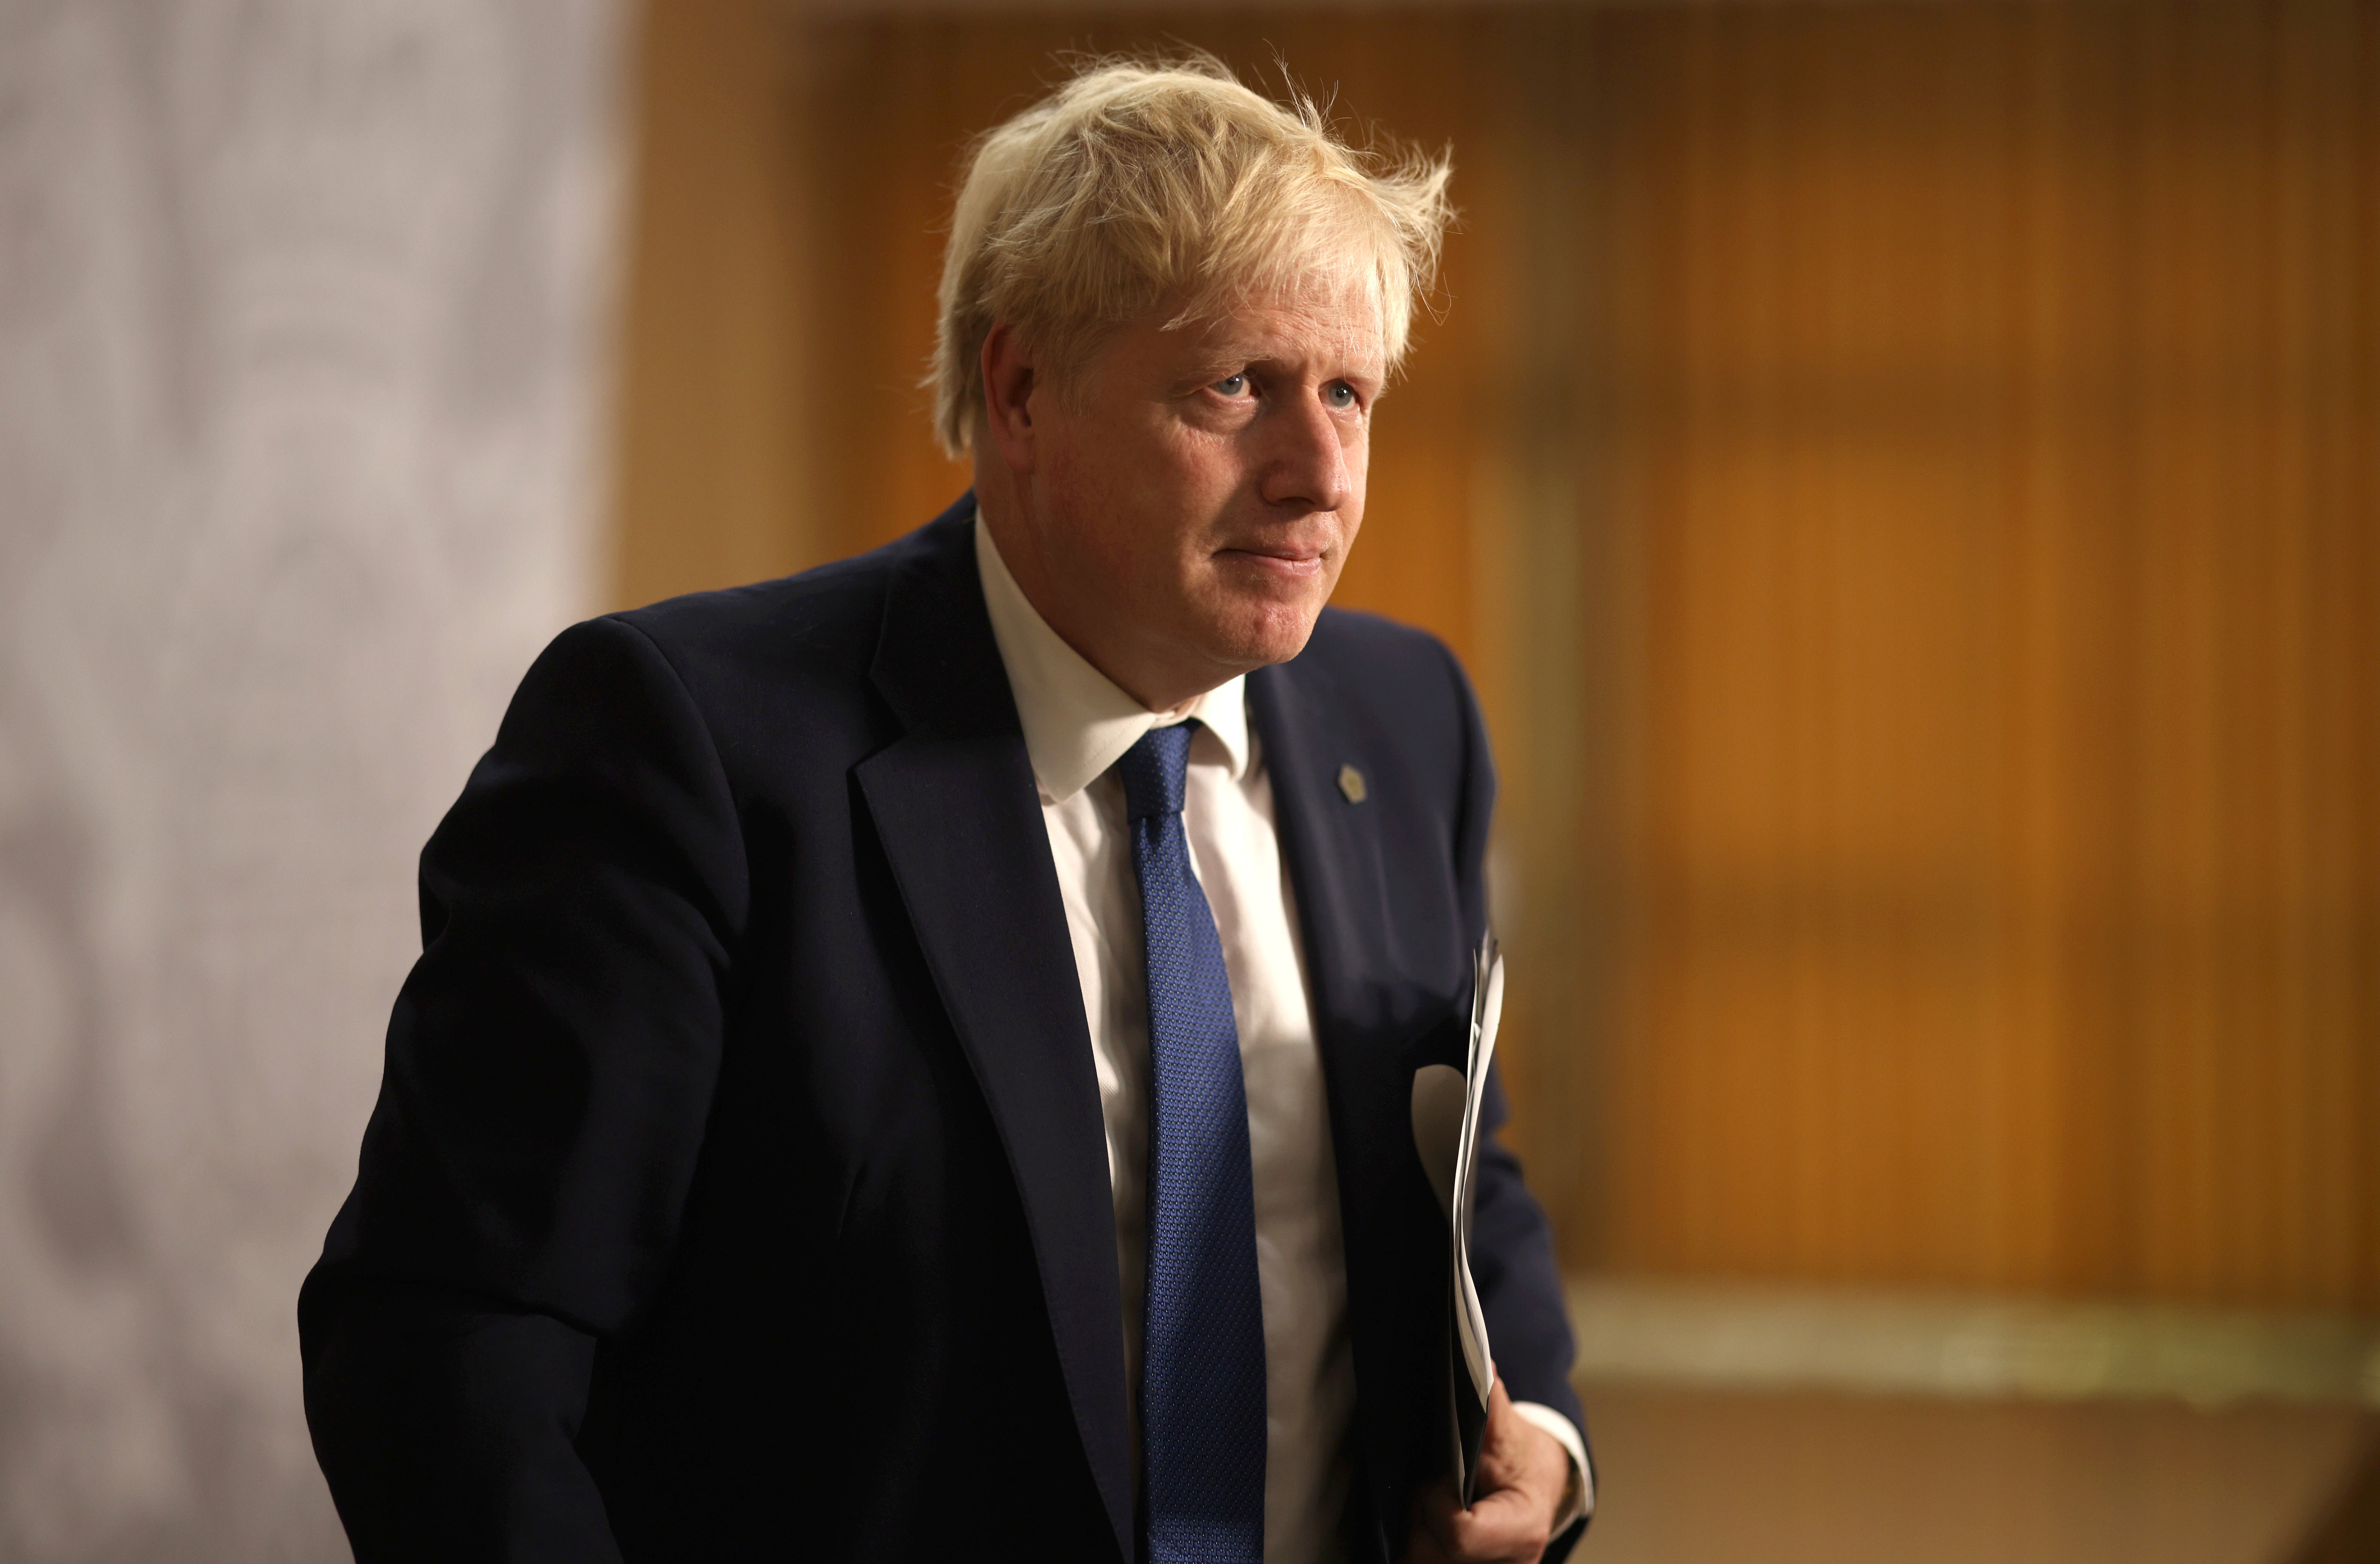 Johnson was spared the political heat as he made international trips